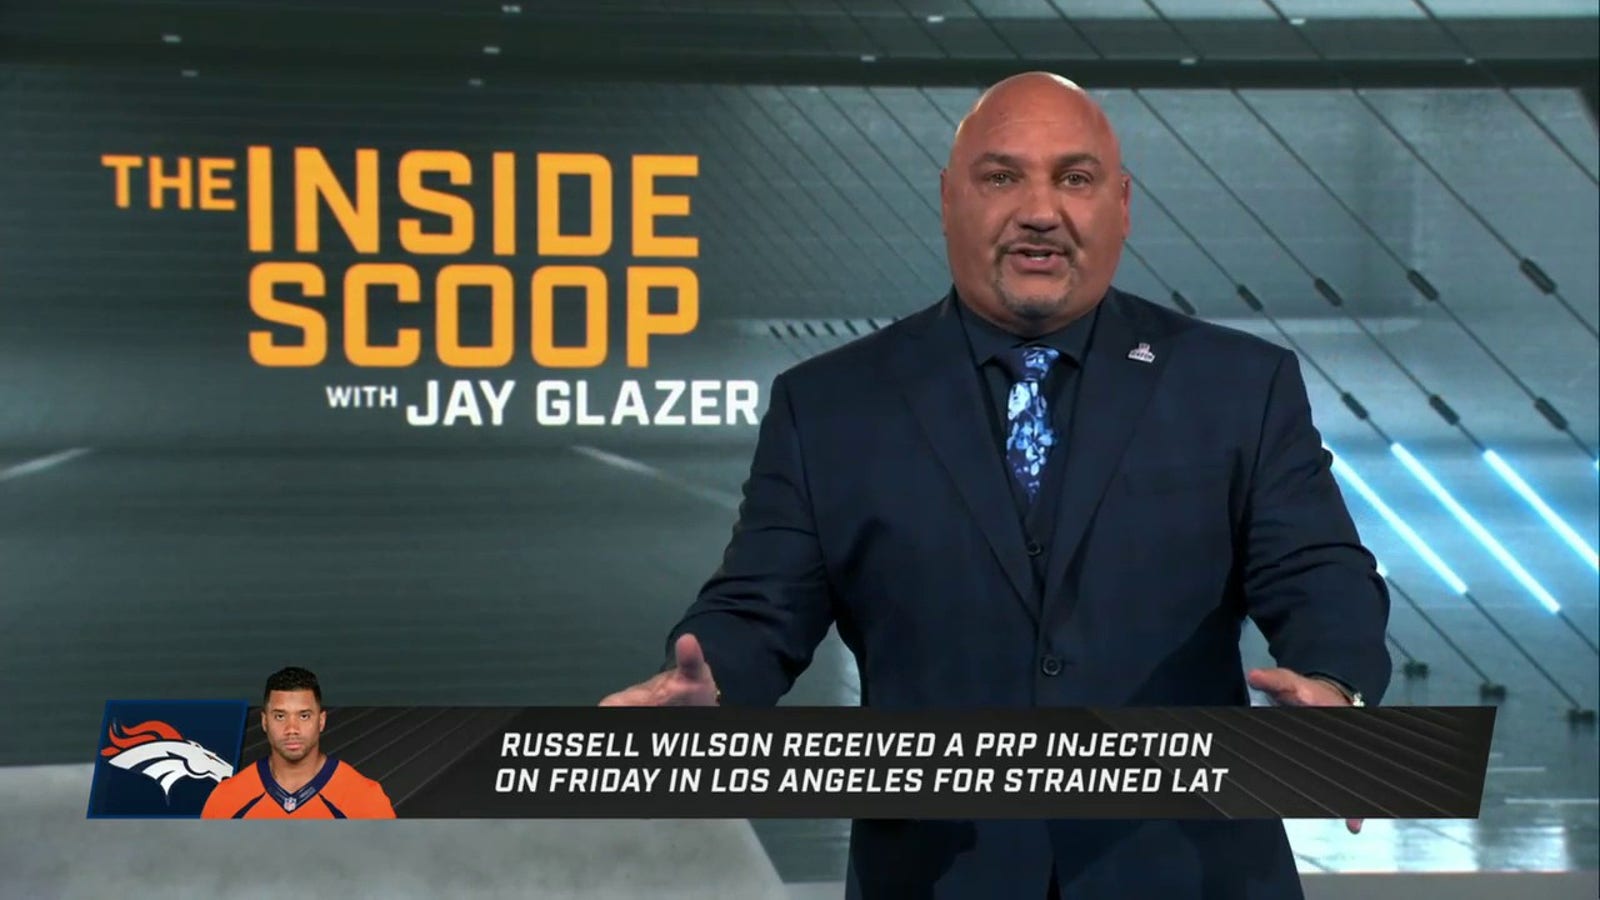 Jay Glazer on Steelers' faith in Kenny Pickett and other topics